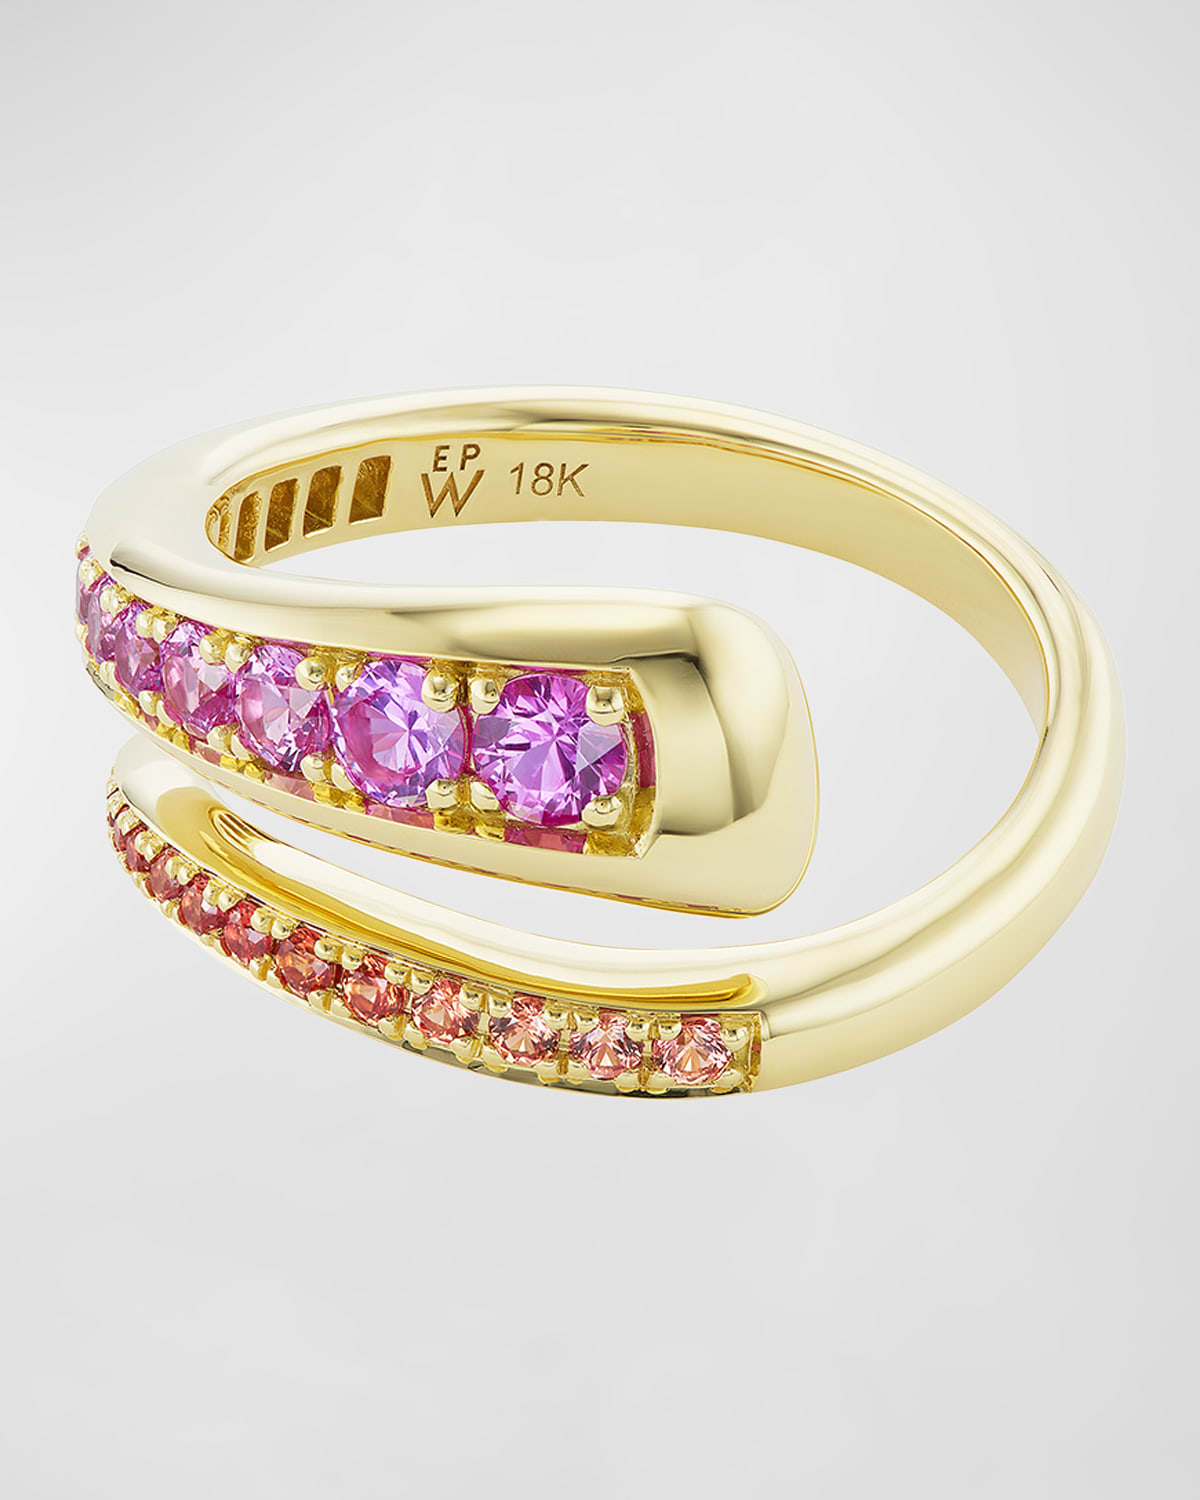 Wrap Ring in 18K Yellow Gold and Pink Sapphires